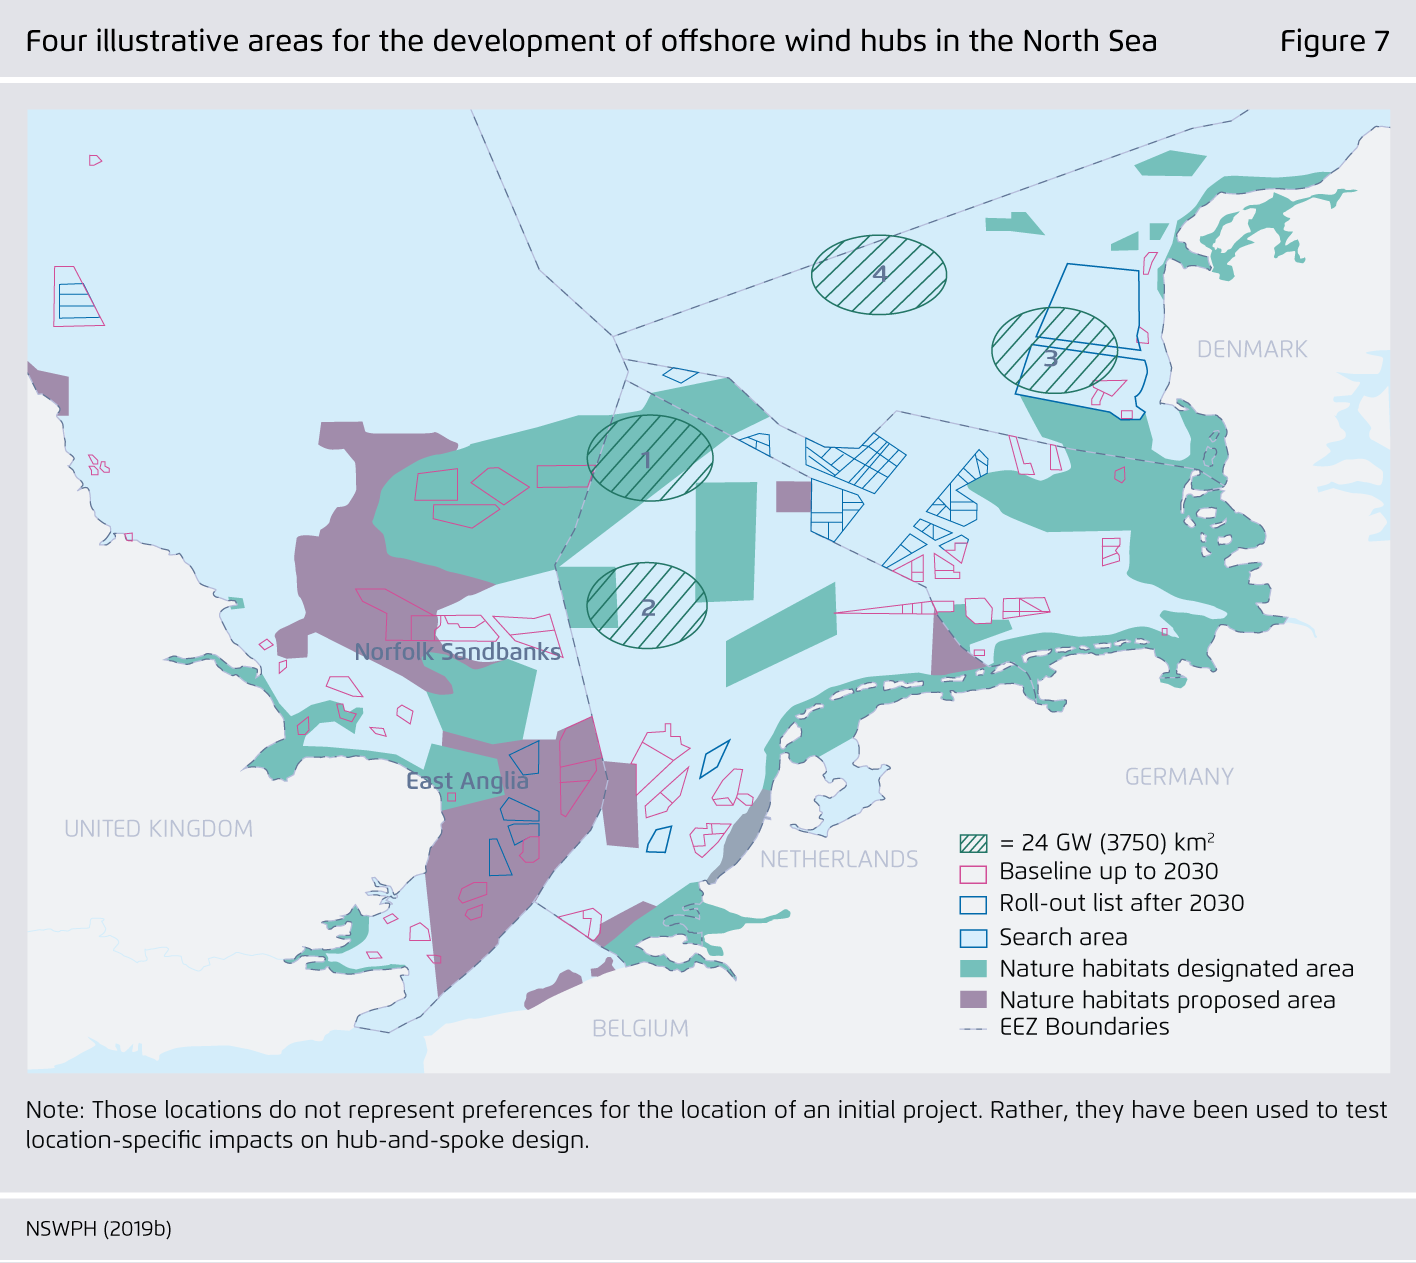 Preview for Four illustrative areas for the development of offshore wind hubs in the North Sea